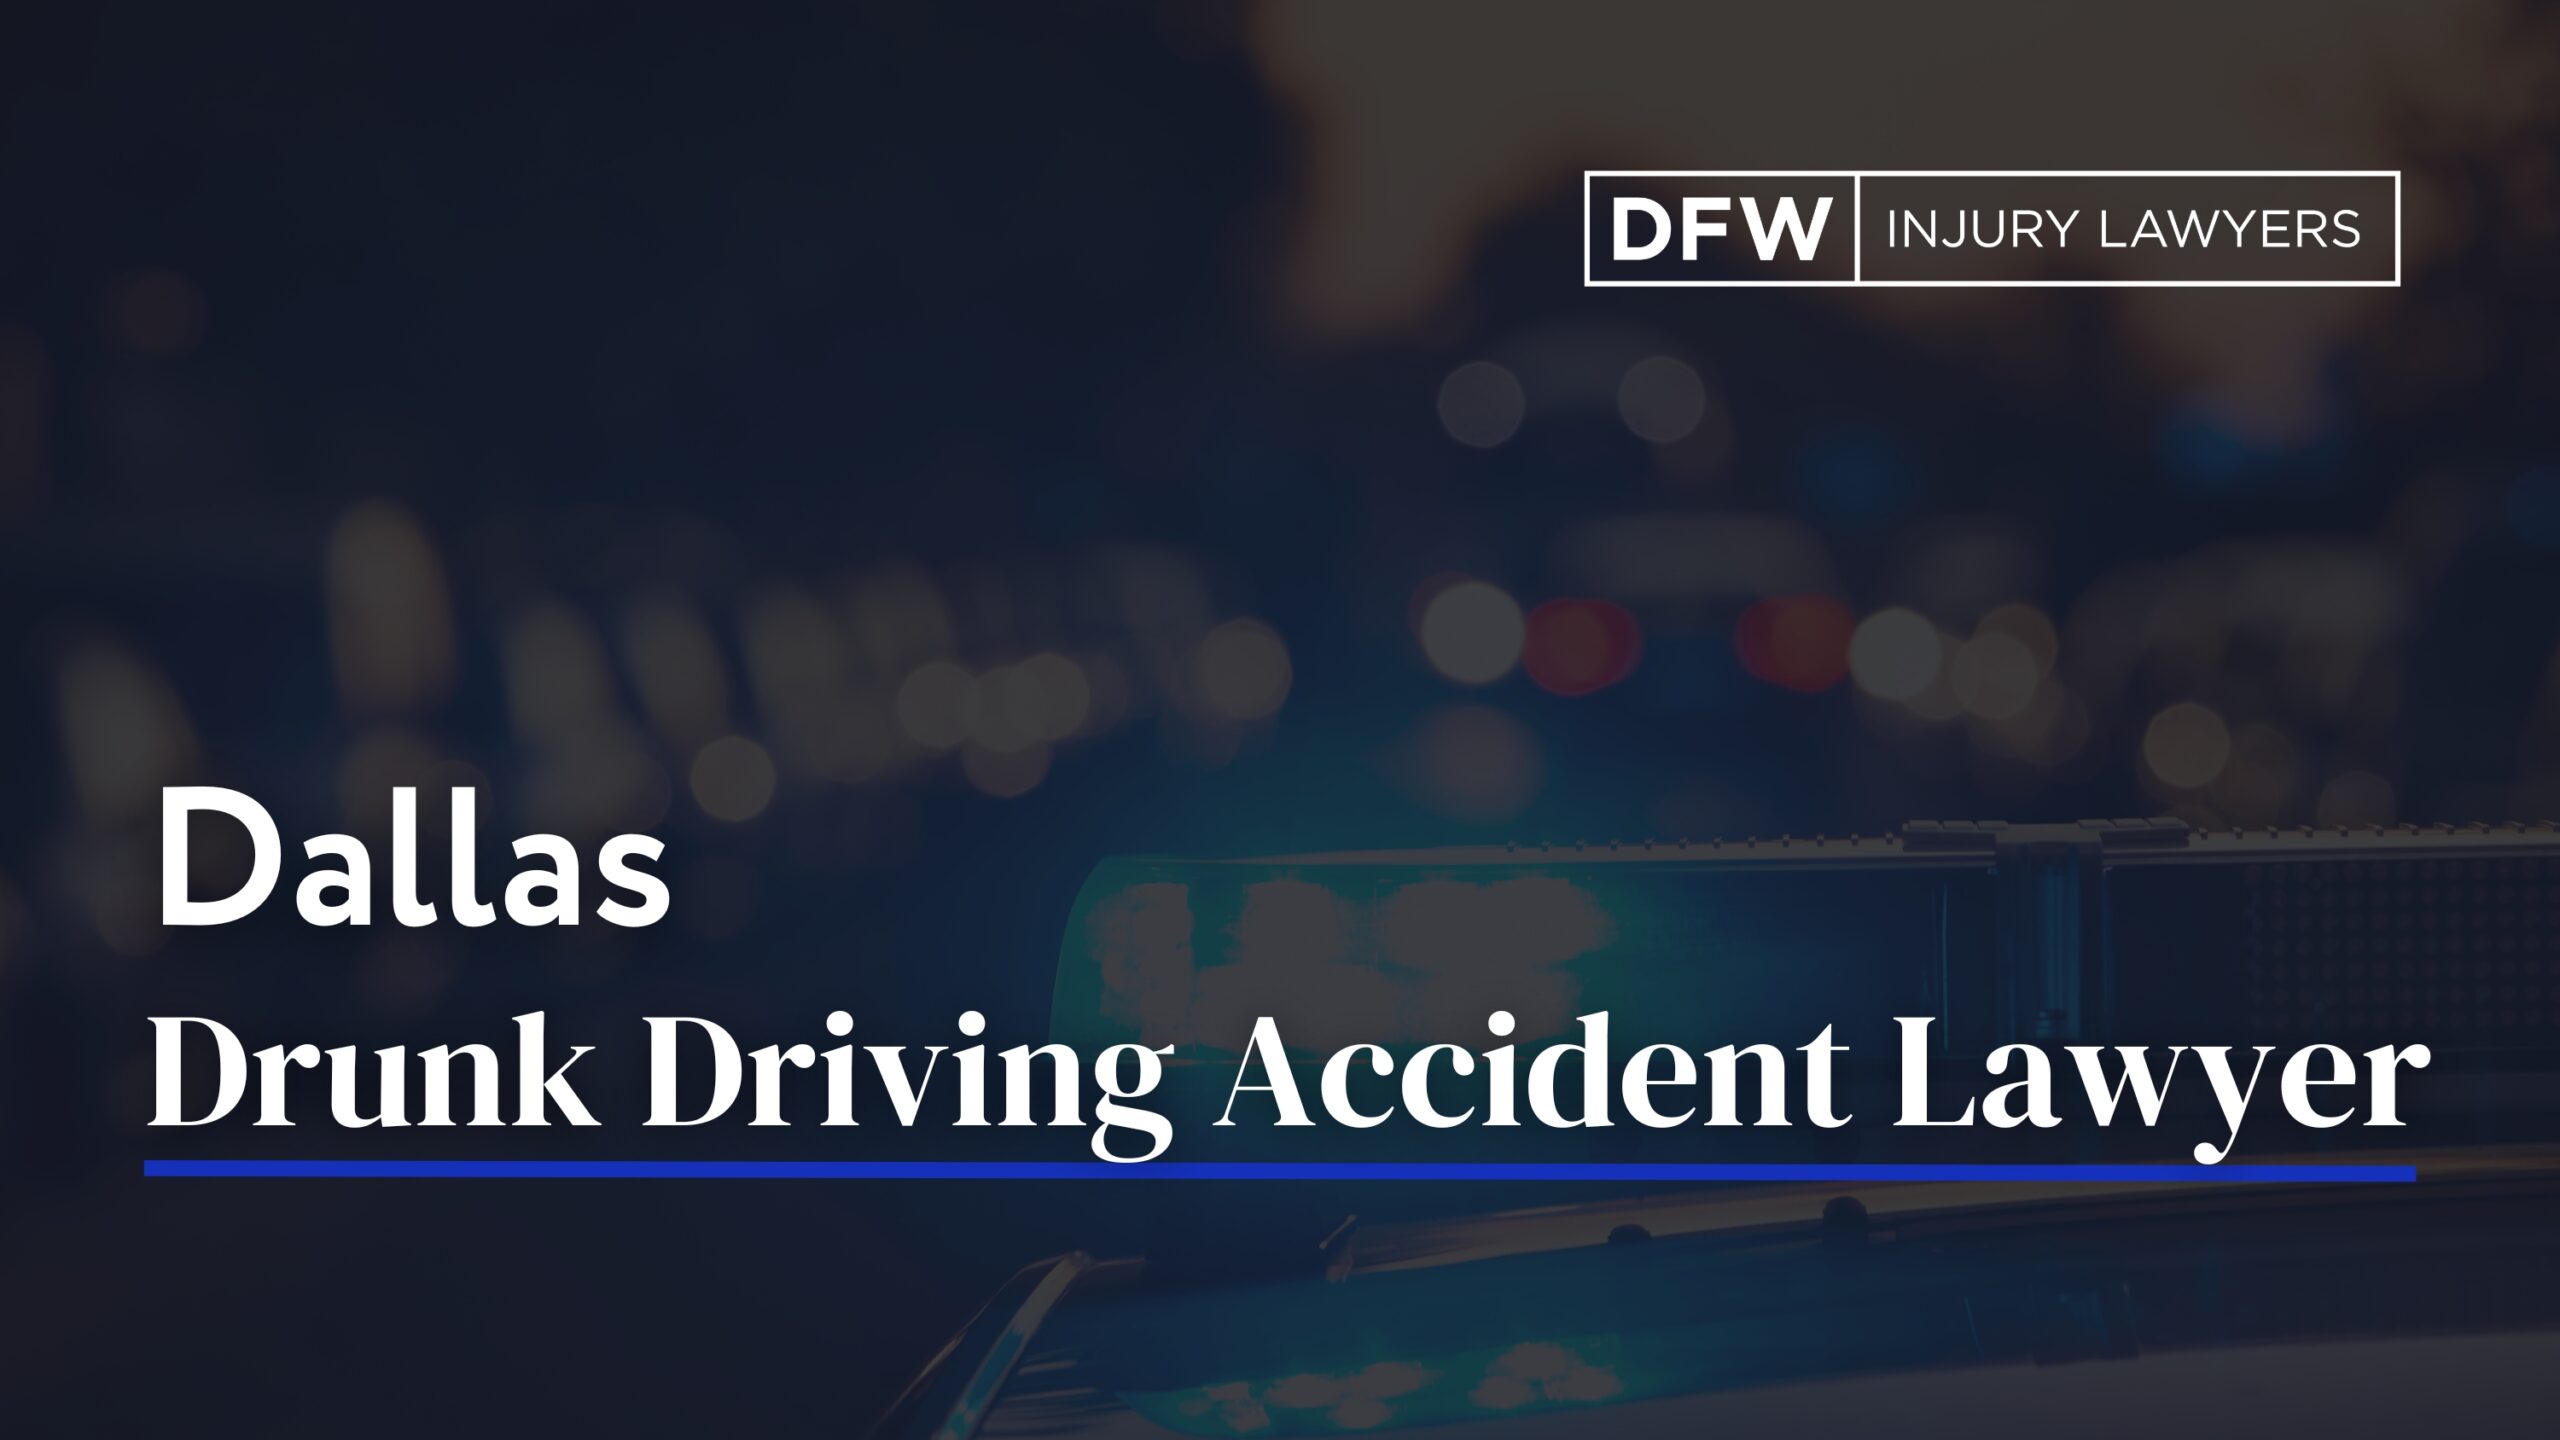 Dallas Drunk driving accident lawyer - DFW